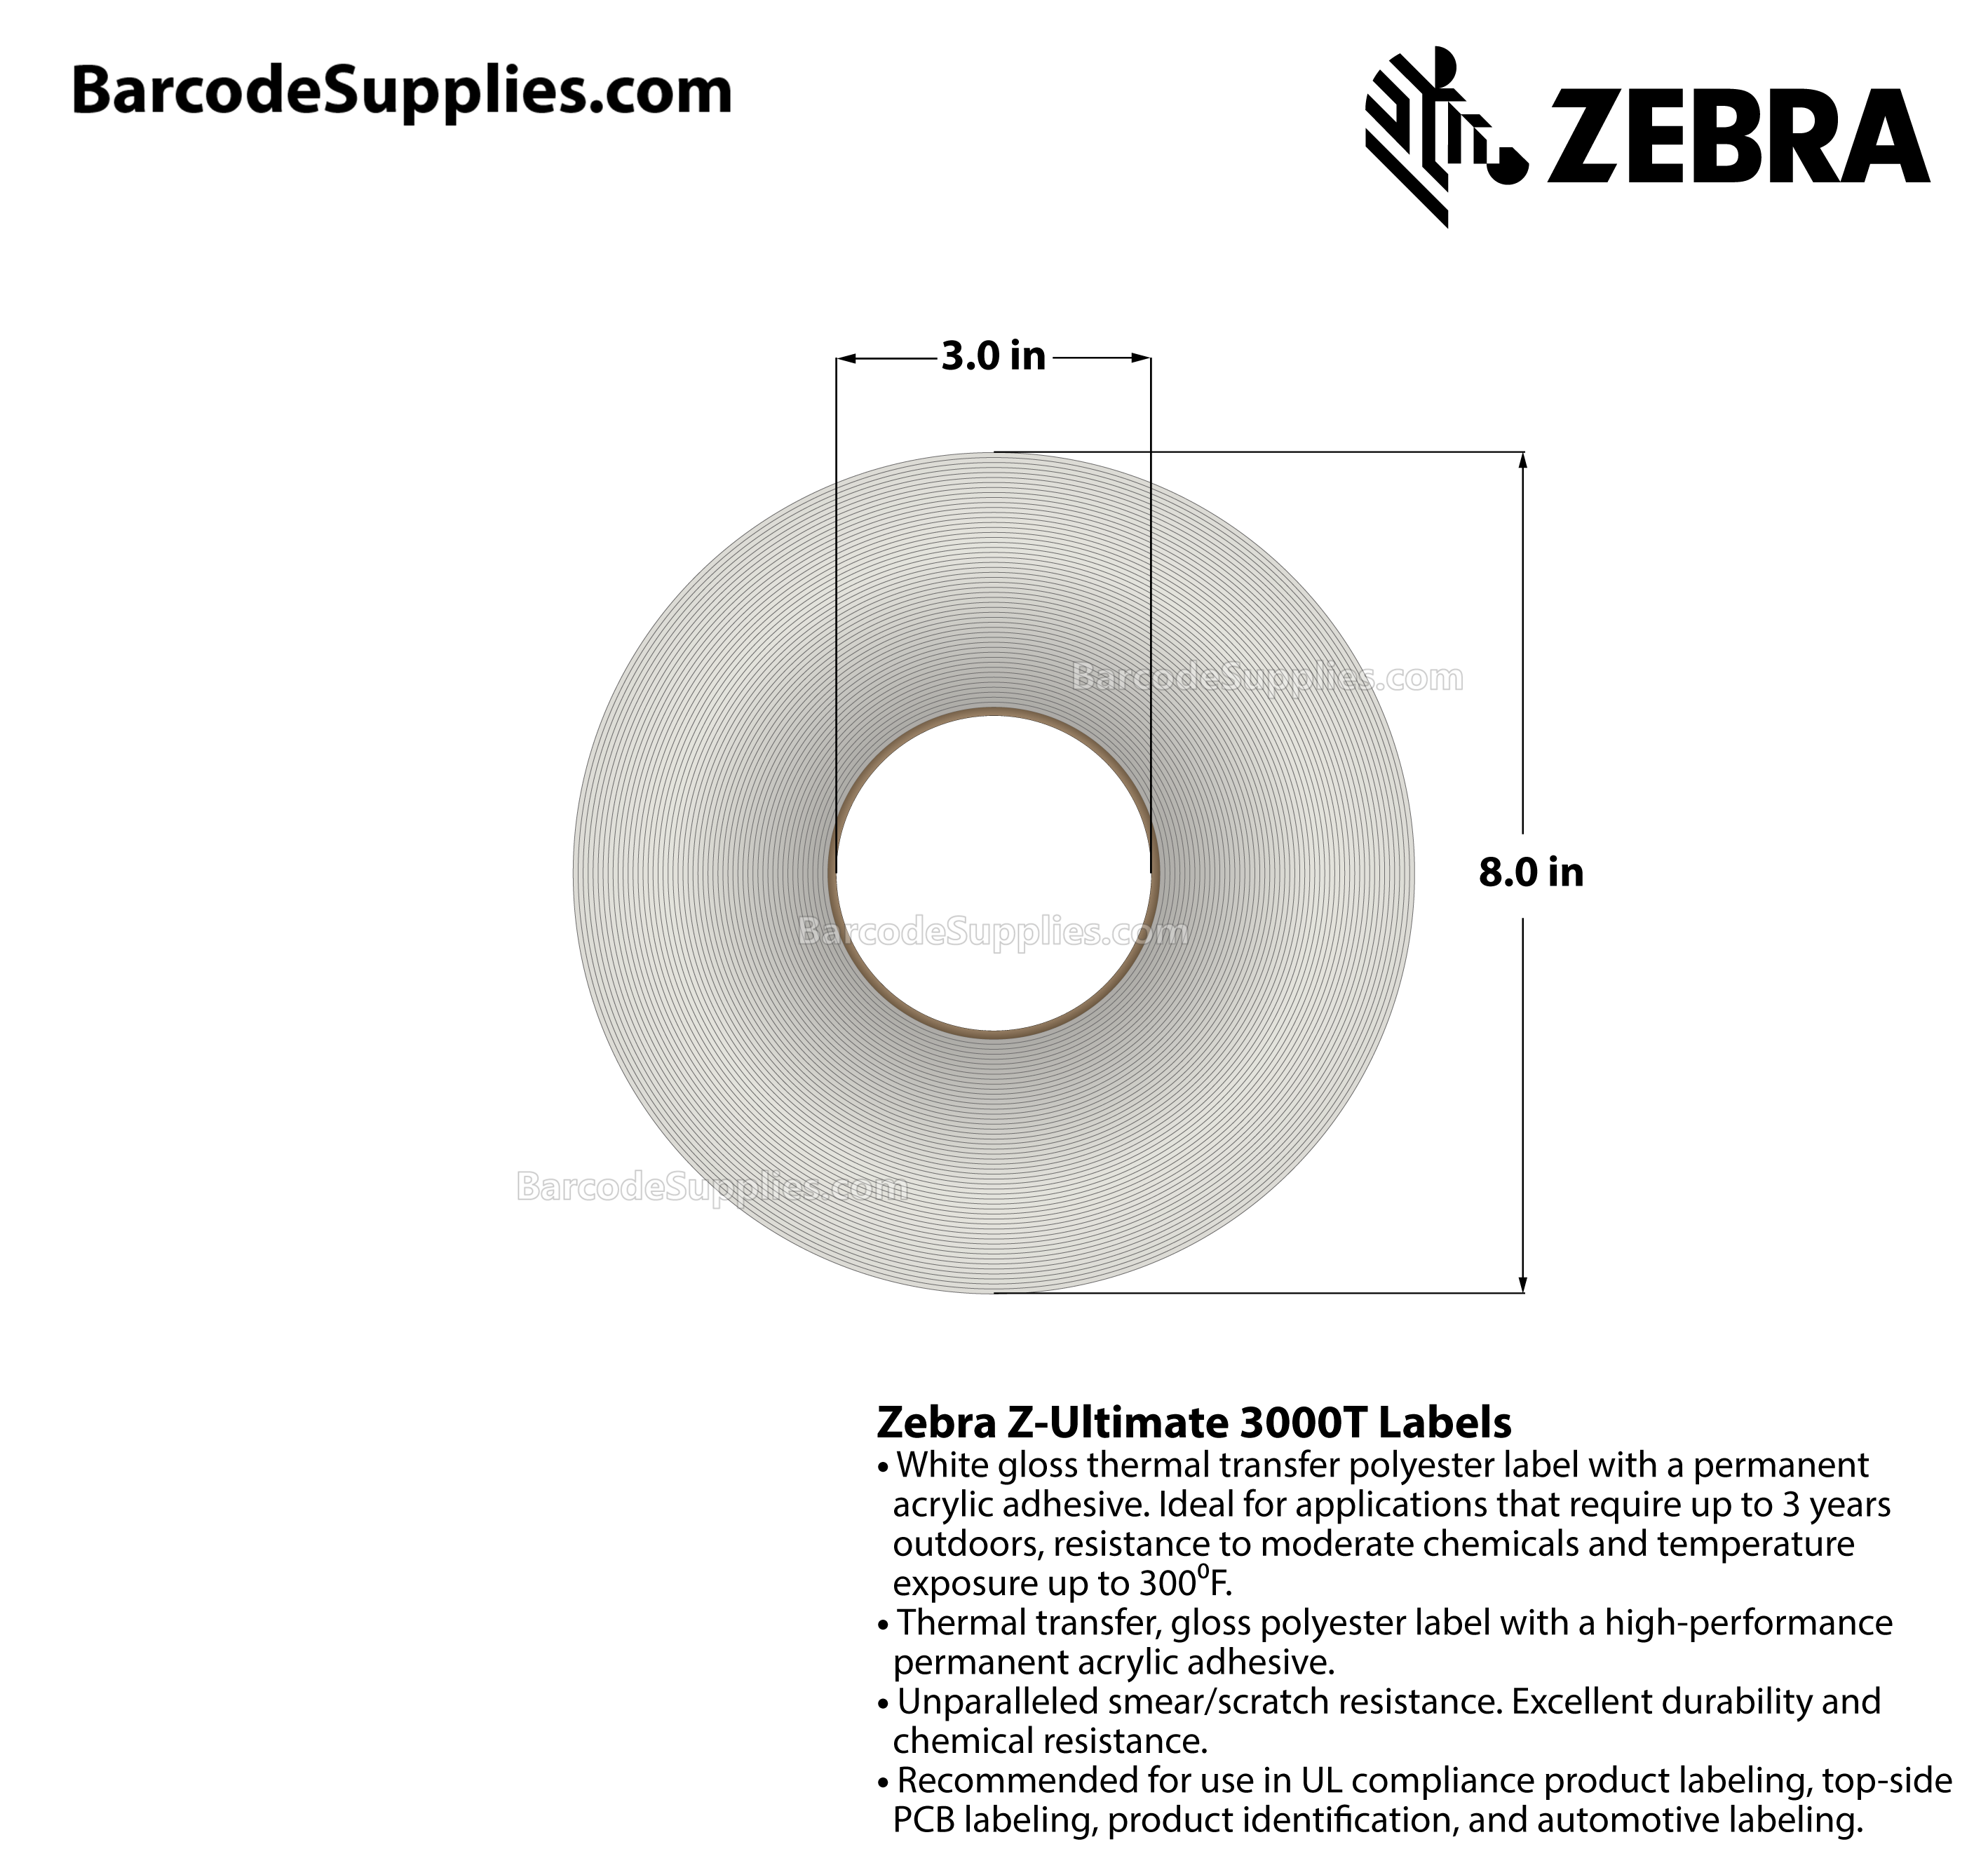 2 x 0.5 Thermal Transfer White Z-Ultimate 3000T Labels With Permanent Adhesive - Not Perforated - 10000 Labels Per Roll - Carton Of 4 Rolls - 40000 Labels Total - MPN: 10011696